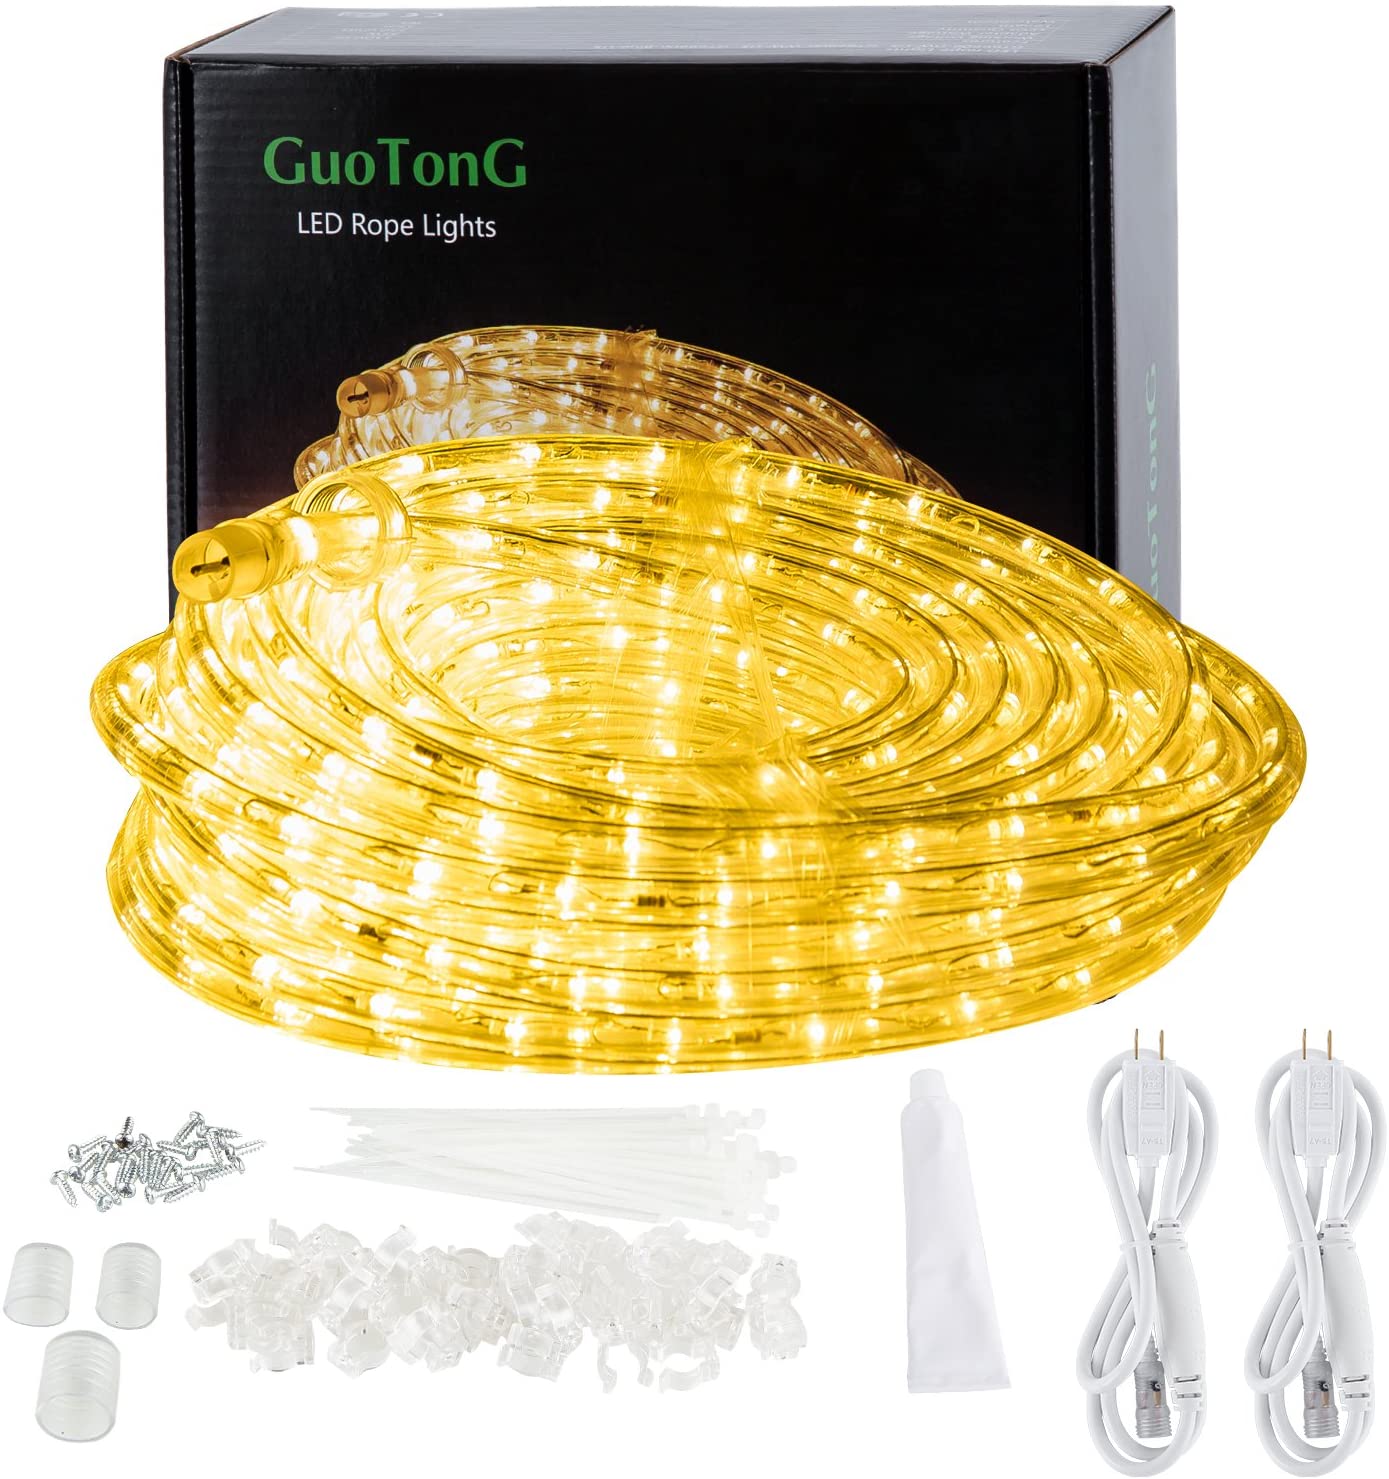 GUOTONG Transparent Outdoor LED Rope Lights, 50-Foot